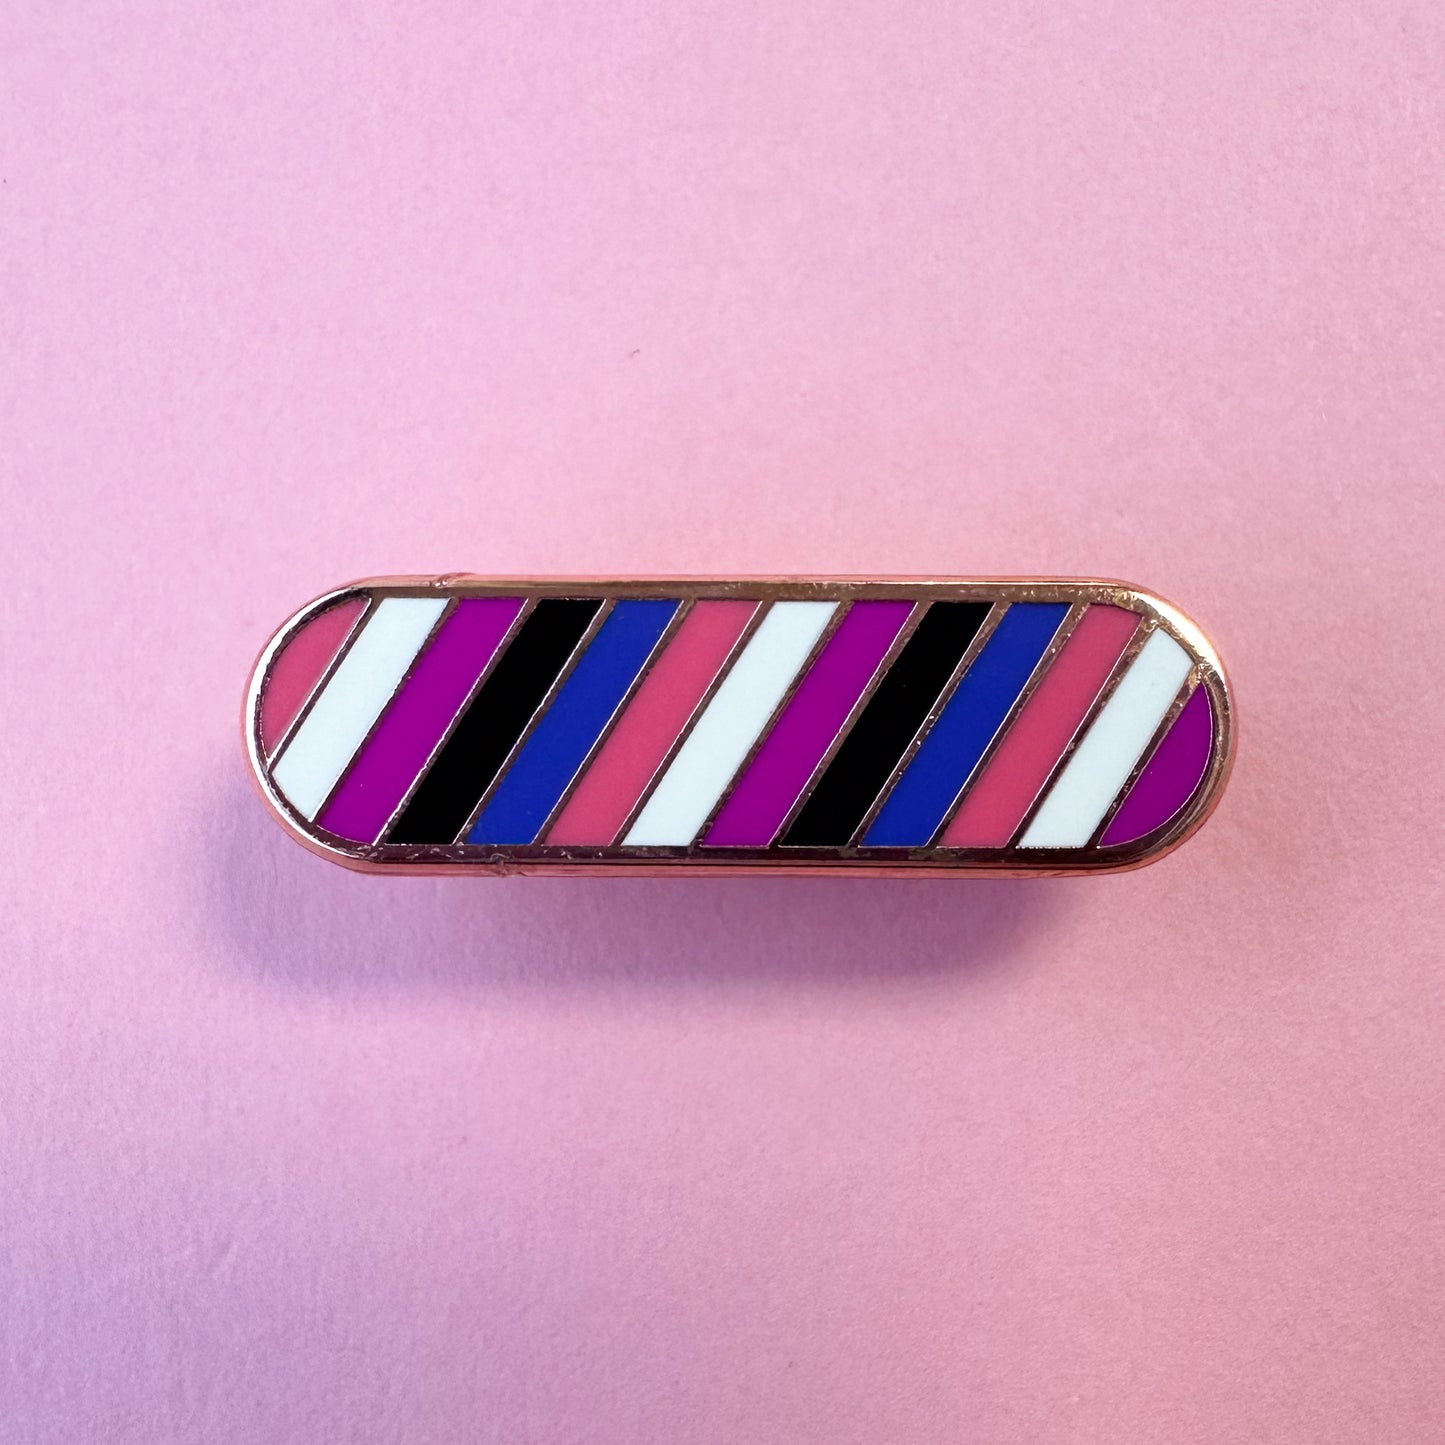 A capsule shaped pin in the colors of the Gender Fluid pride flag on a pink background. 